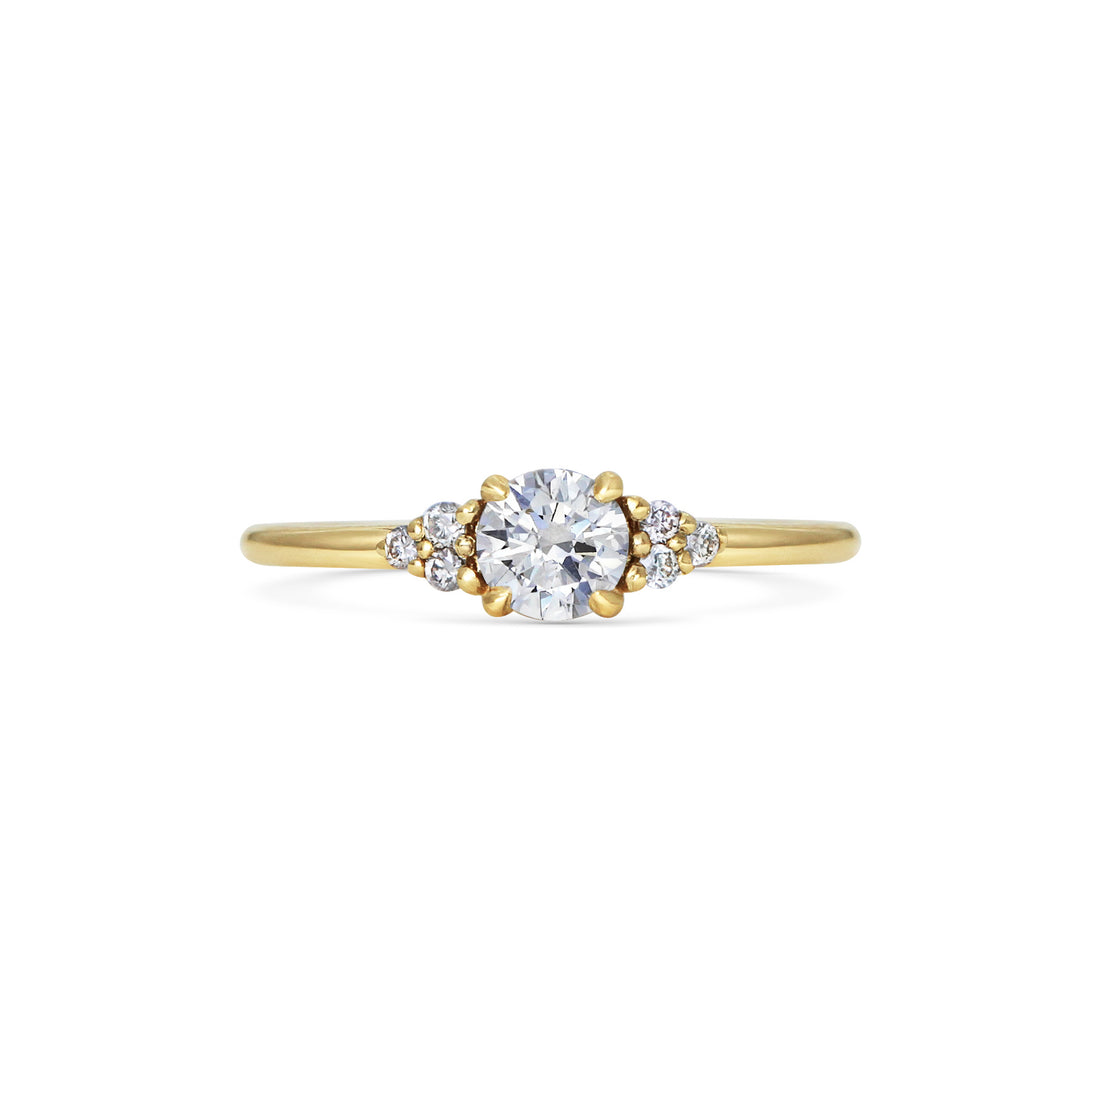  Delicate Round Diamond Ring by Michelle Oh | The Cut London